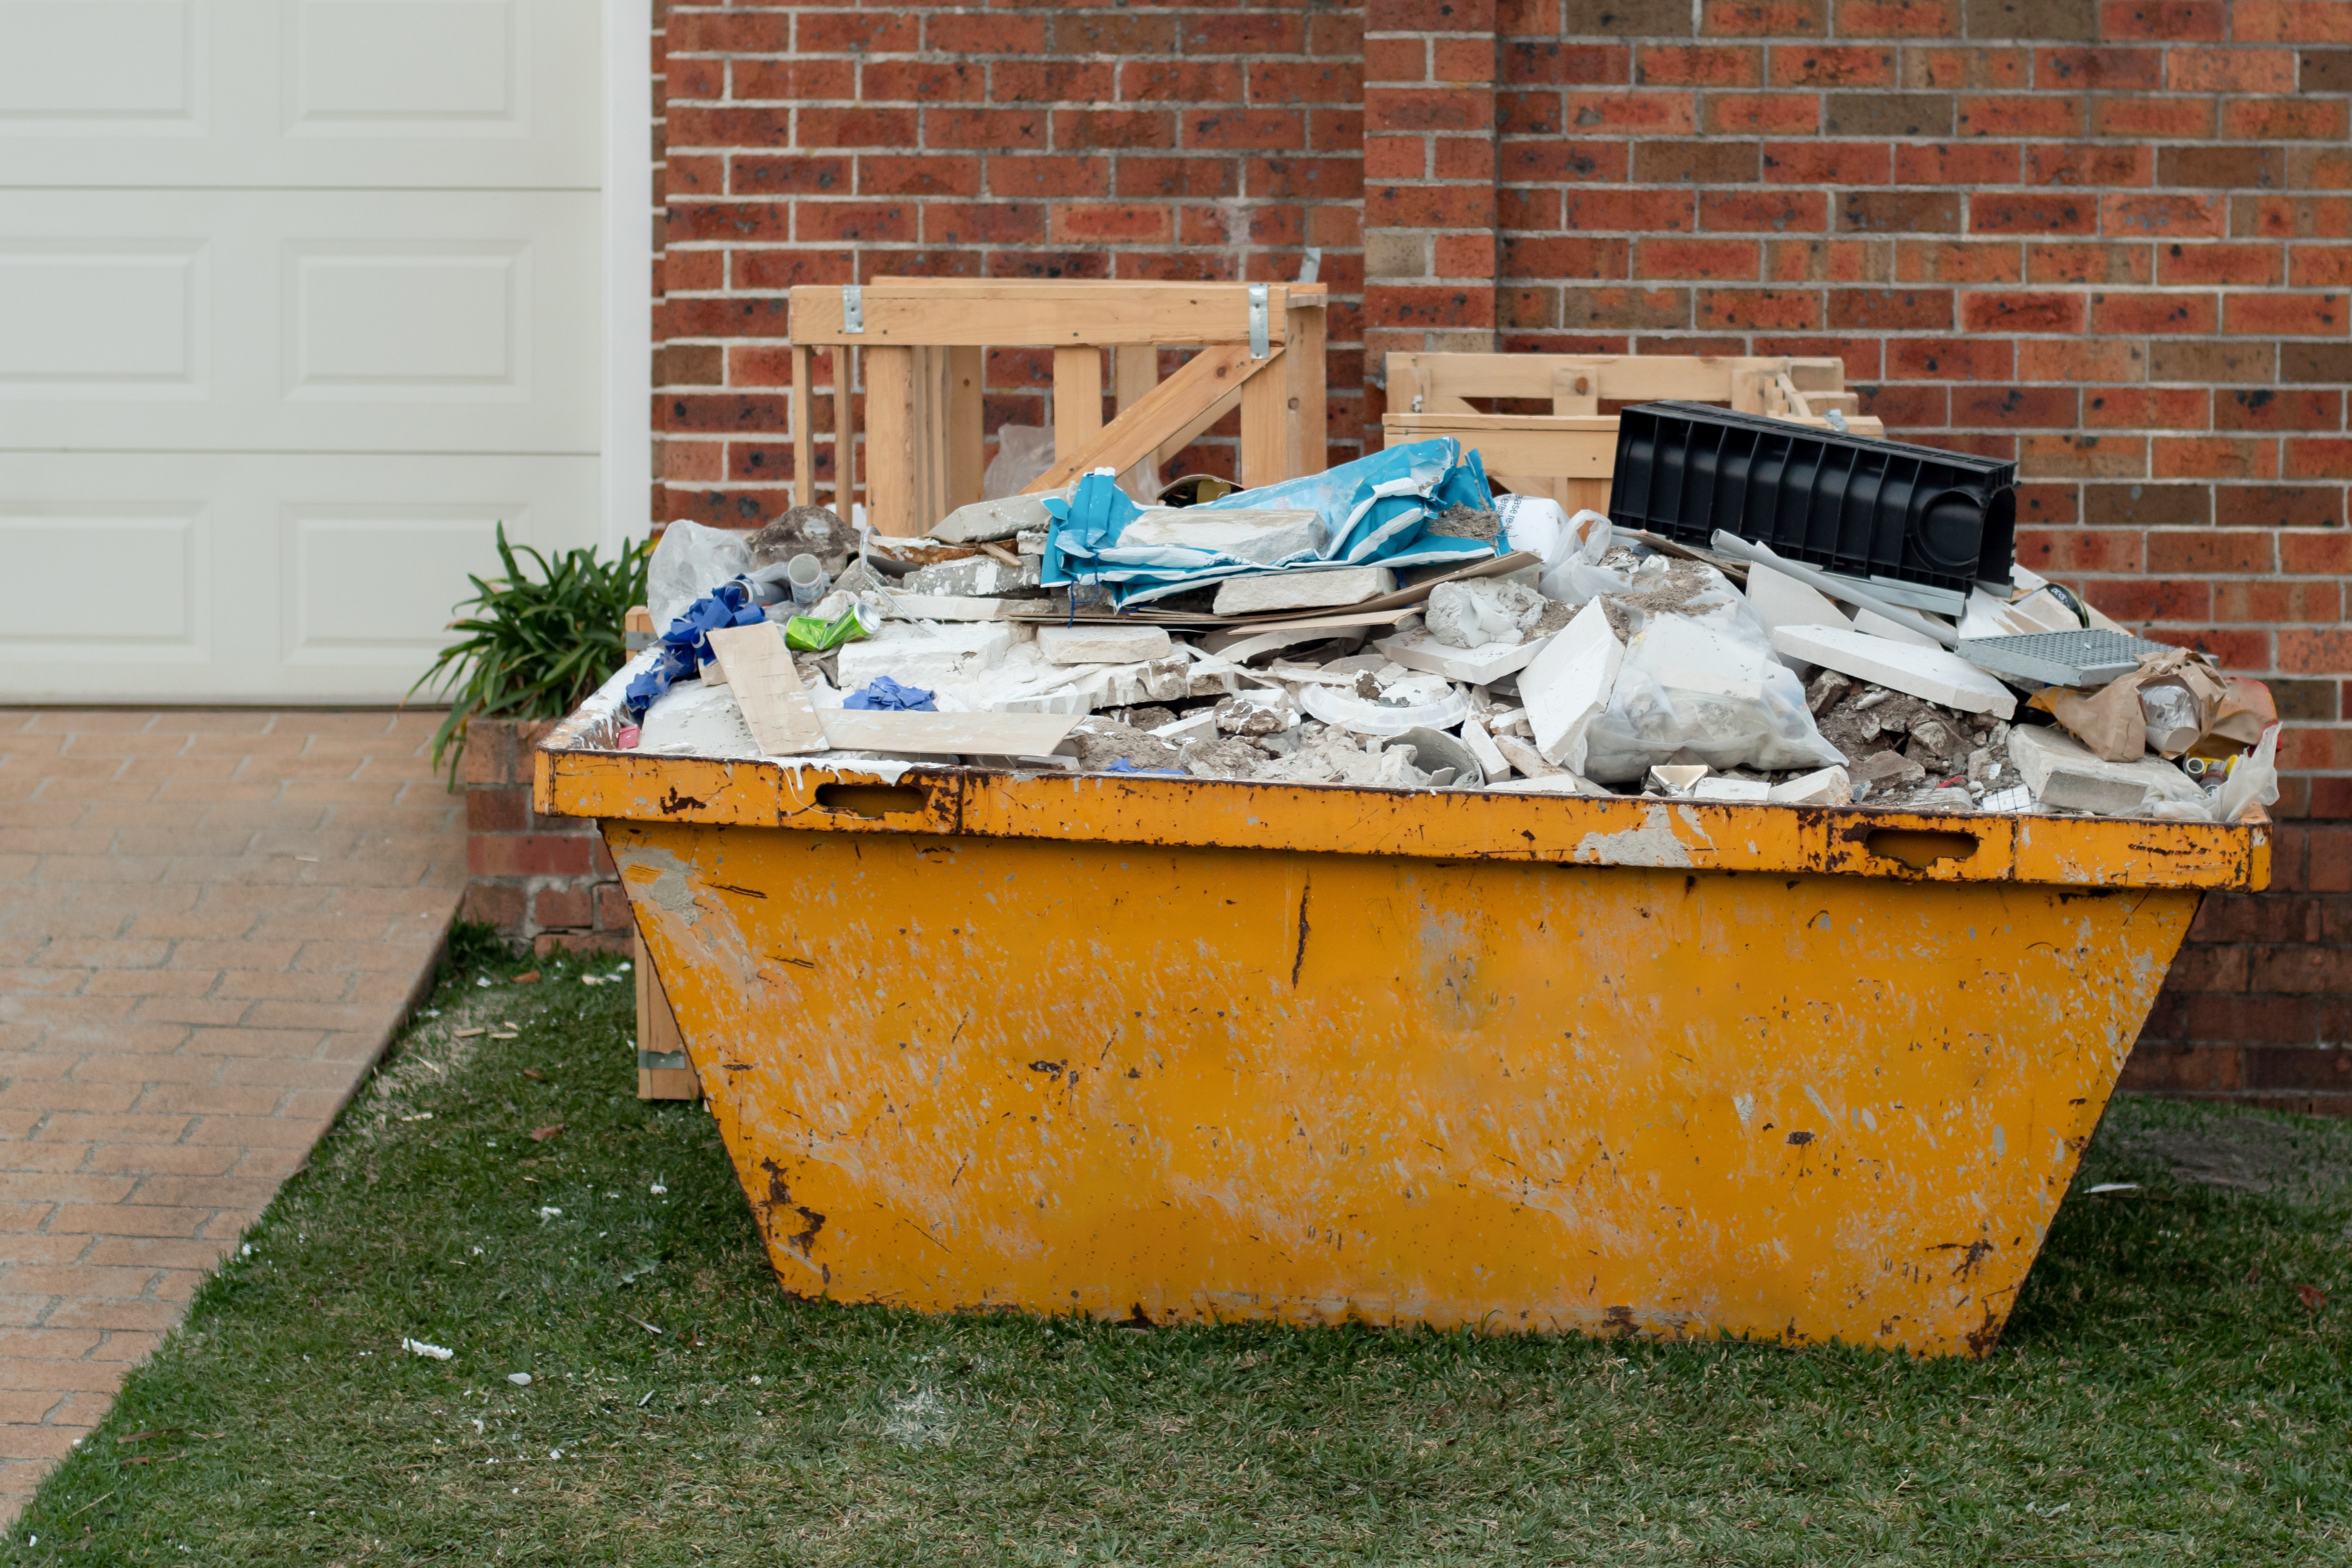 Home renovations can be both exciting and daunting, and managing the resulting waste can often be a headache. Enter skip bins – your ultimate solution for efficient waste disposal during your renovation project. Not only do they help keep your work area clean and organised, but they also save you valuable time and effort in dealing with debris. Read on to learn more!